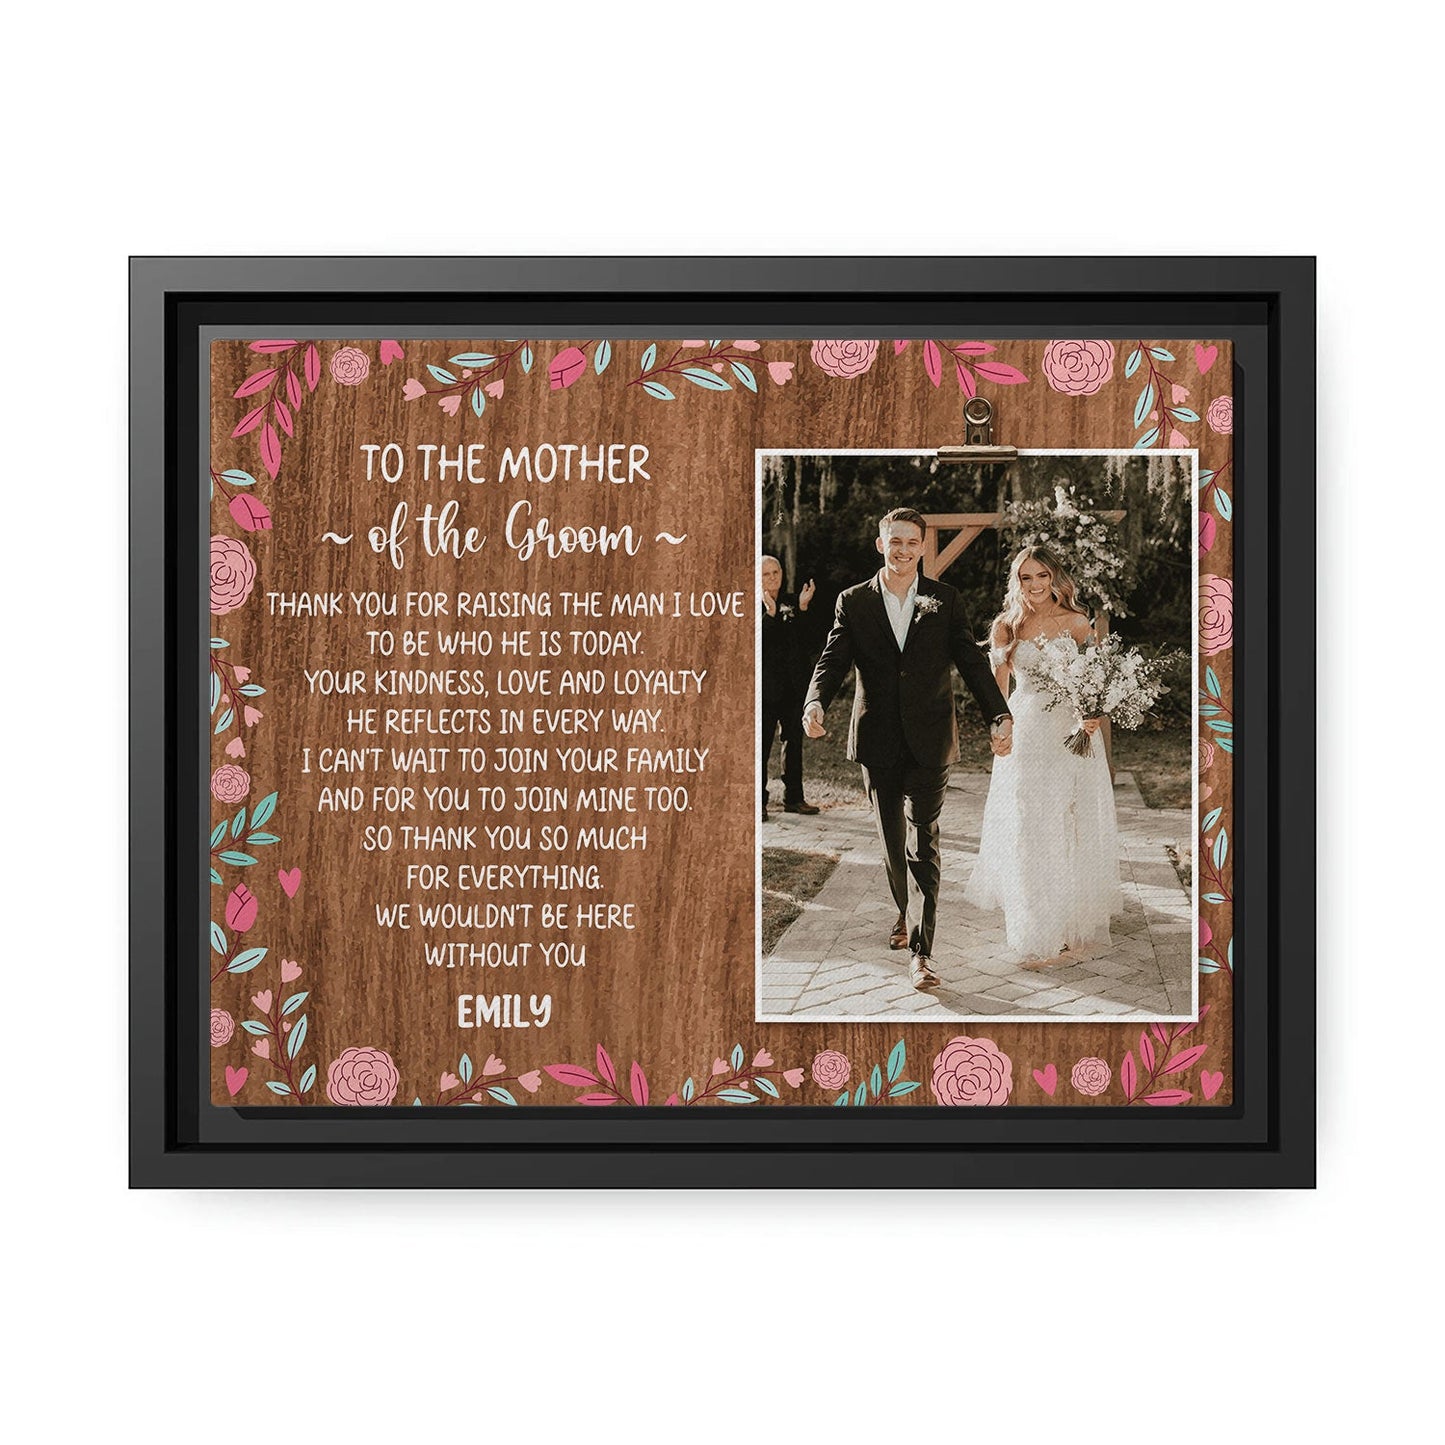 Gift To Mother Of The Groom From Bride - Personalized Wedding gift For Mother In Law - Custom Canvas Print - MyMindfulGifts